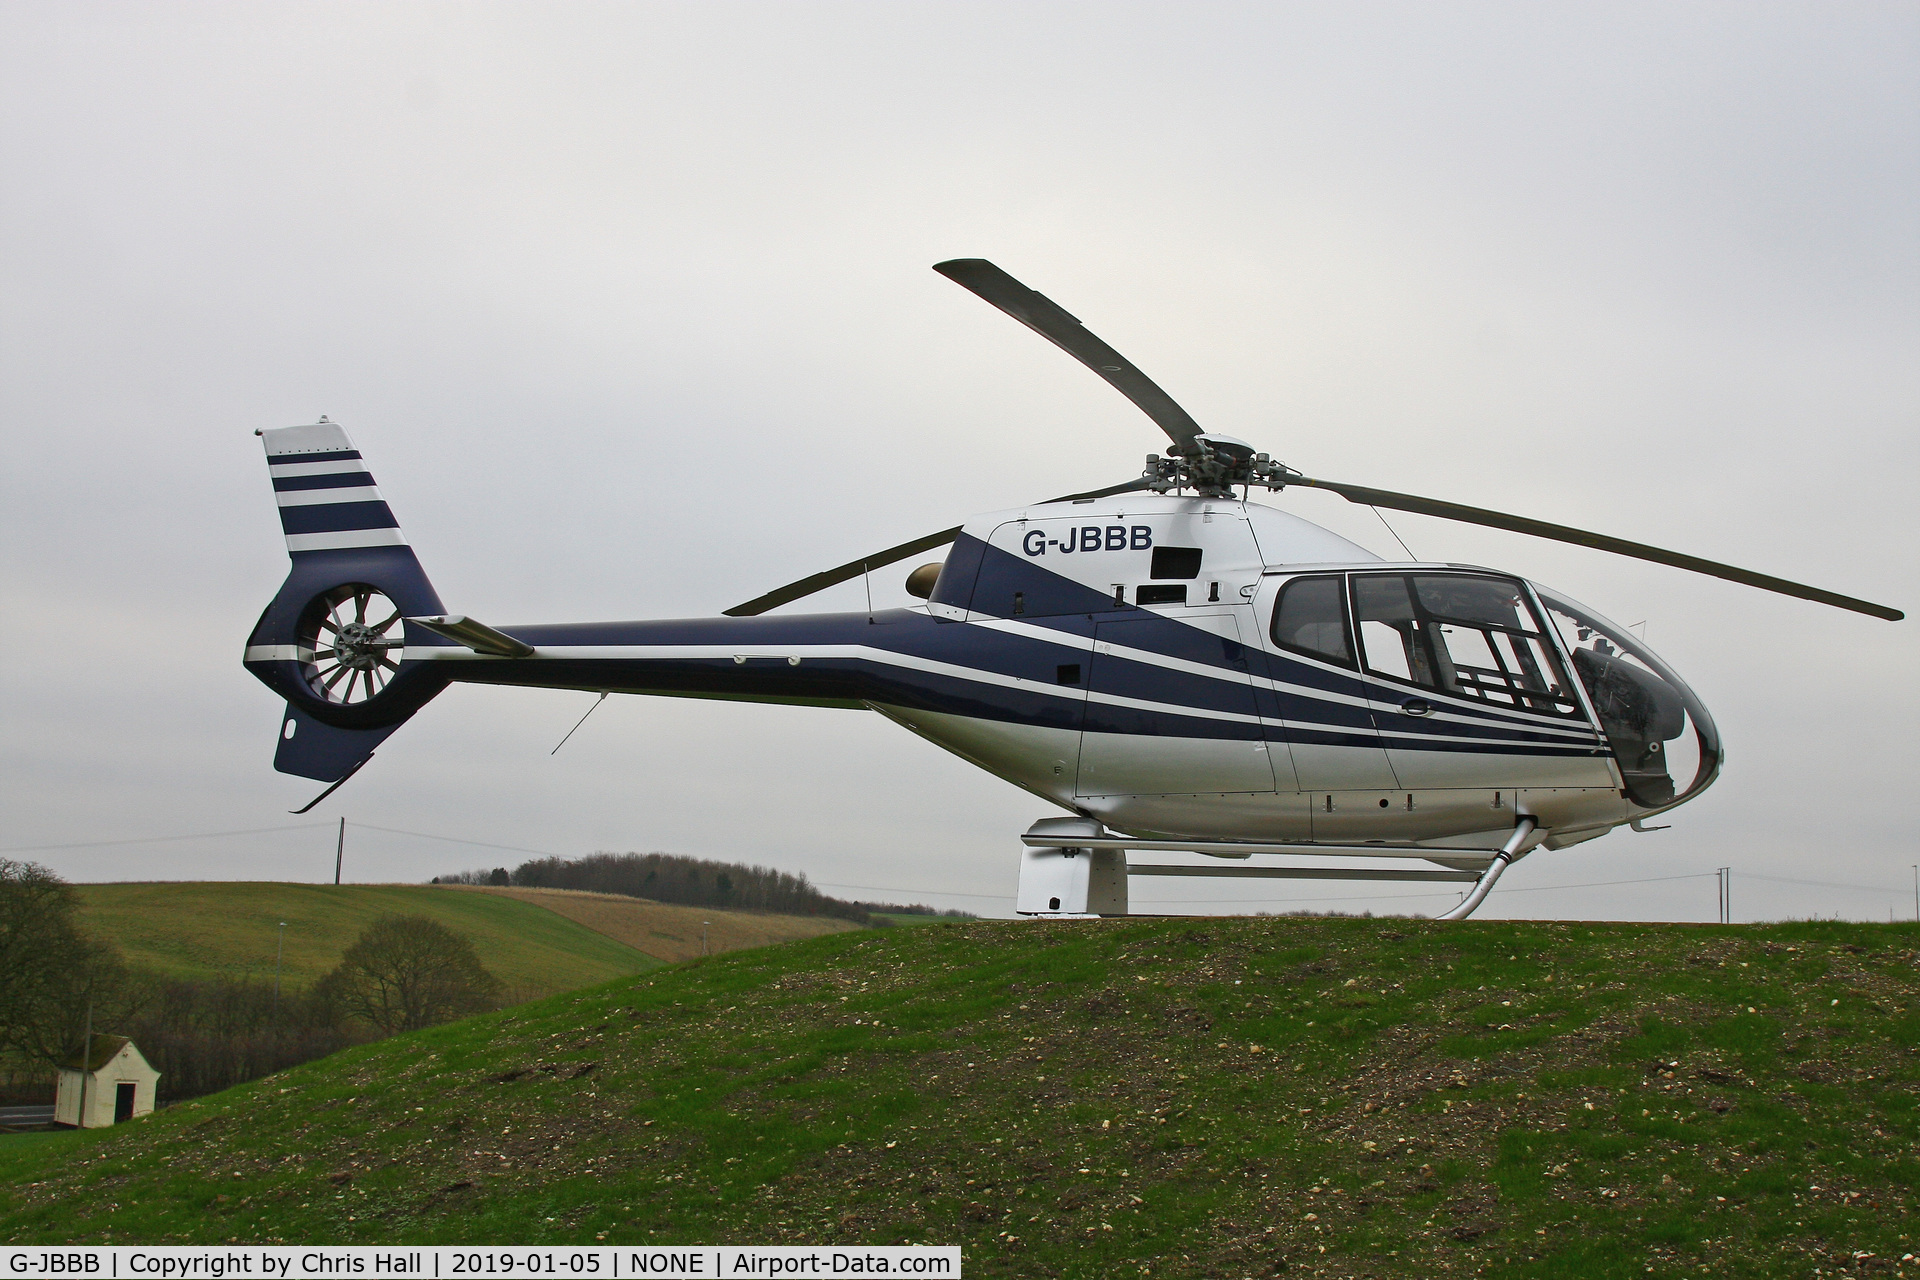 G-JBBB, 2004 Eurocopter EC-120B Colibri C/N 1380, at a private site before our flight to North Coates